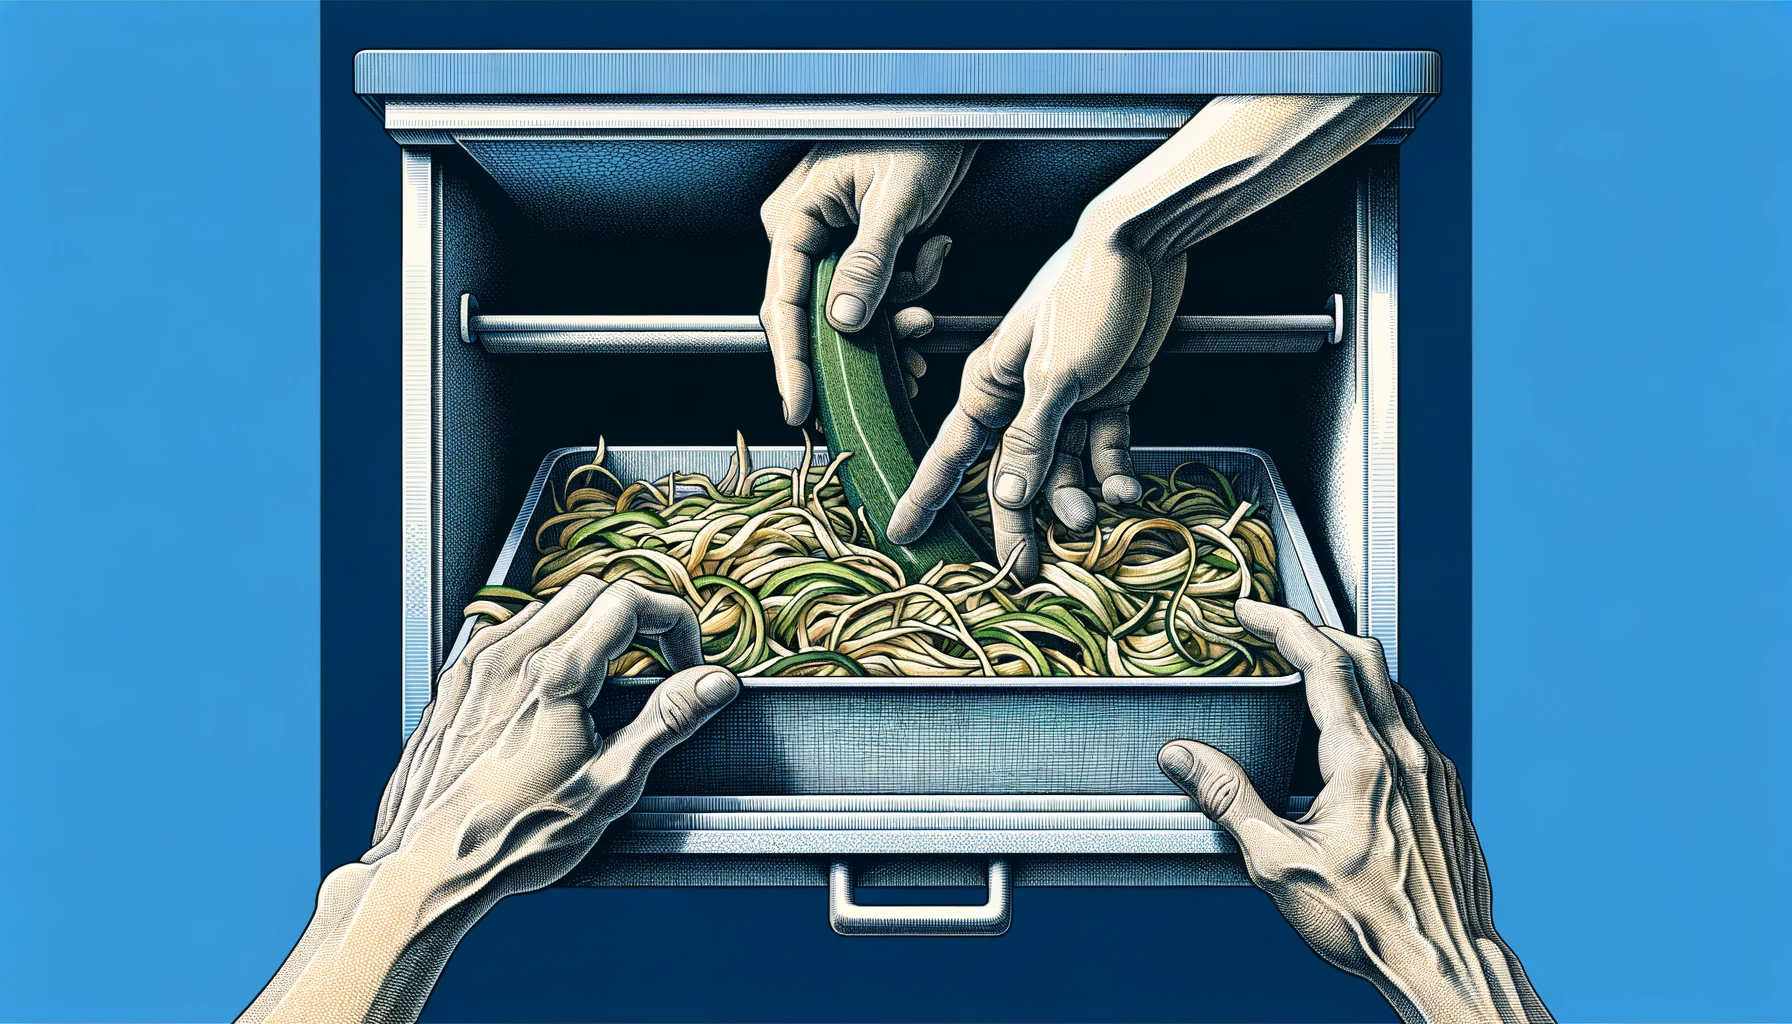 Tasty-Looking Shredded Zucchini Being Placed Into A Freezer By Human Hands Set On A Dark Blue Background